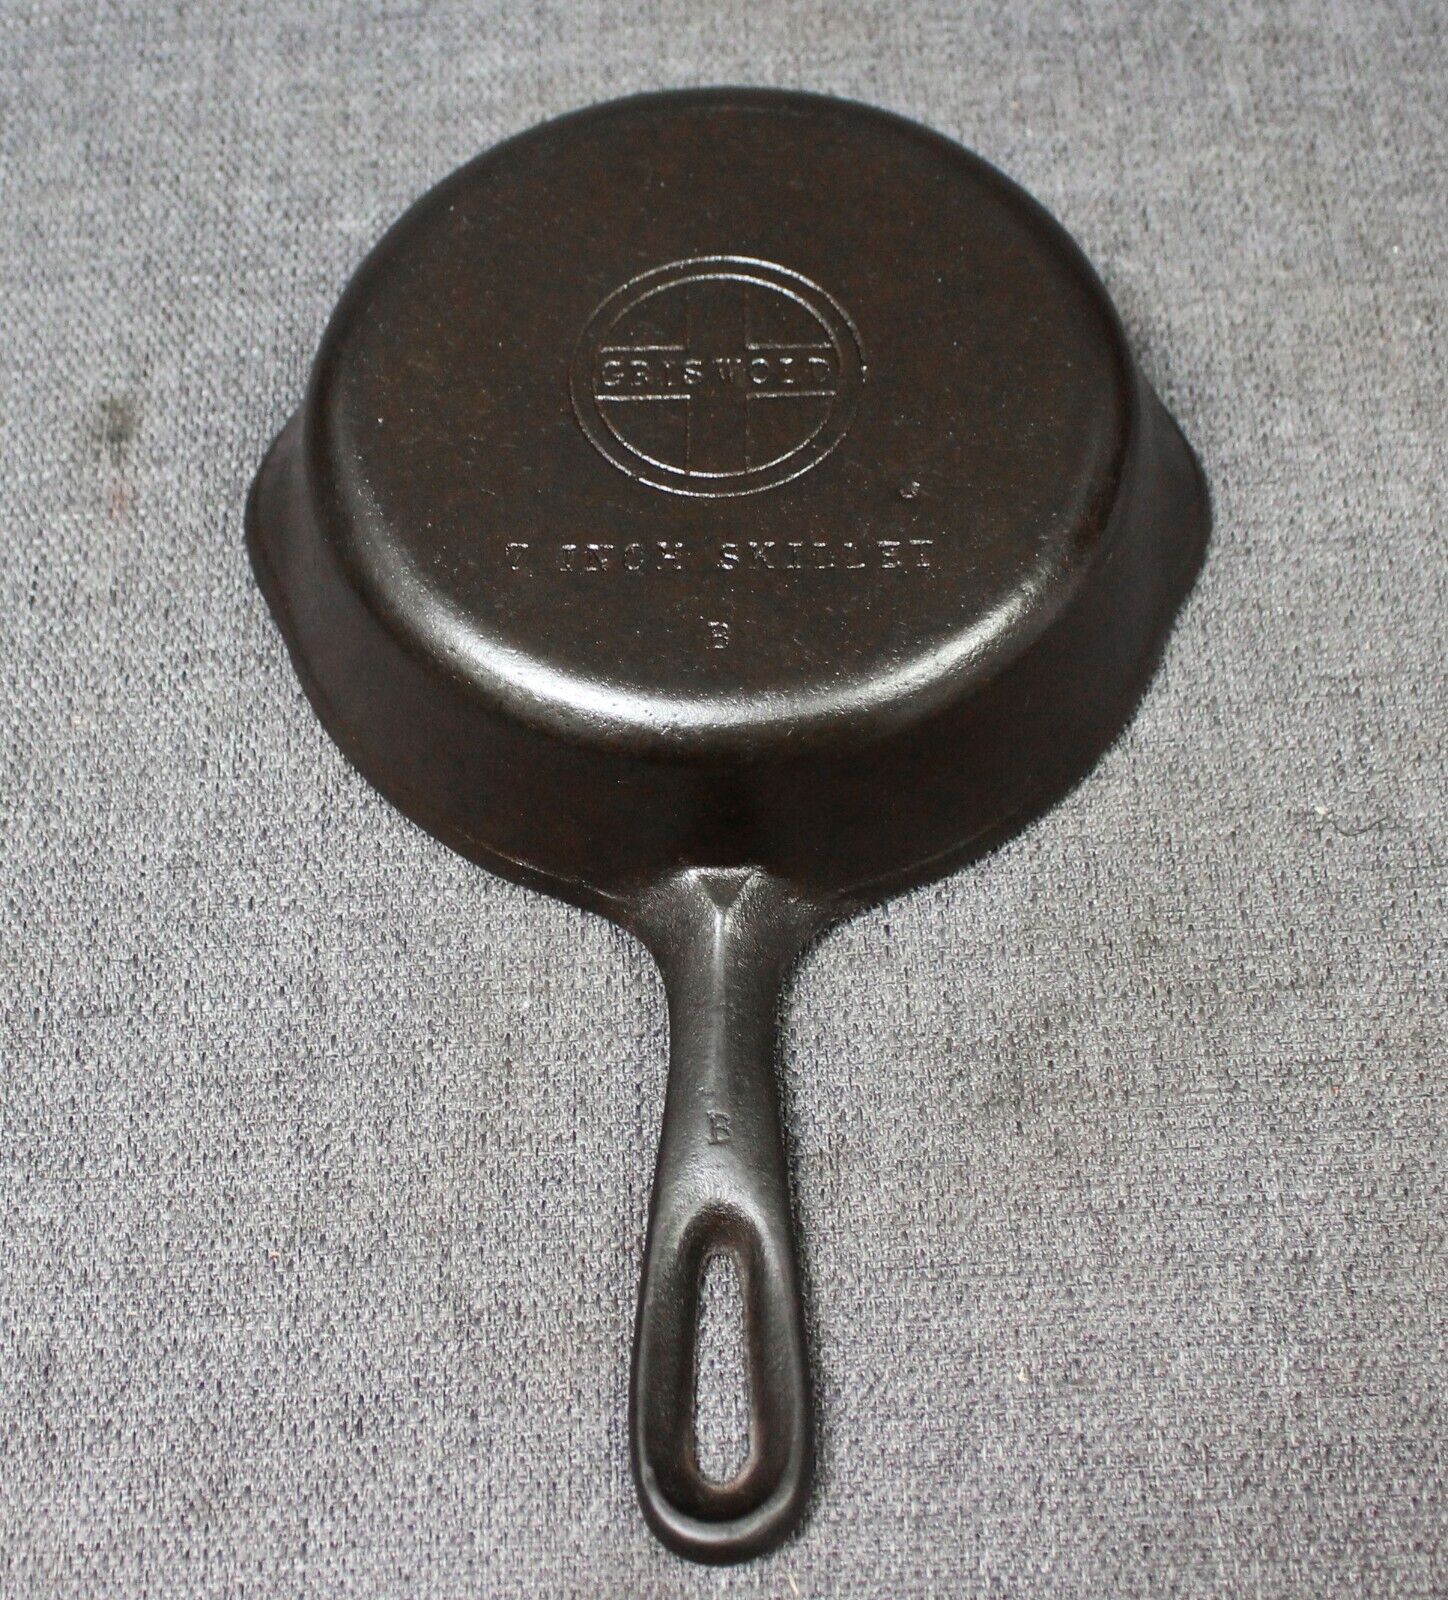 Griswold #4 Skillet DEAD FLAT - Restored - Small Logo - Excellent Conditon